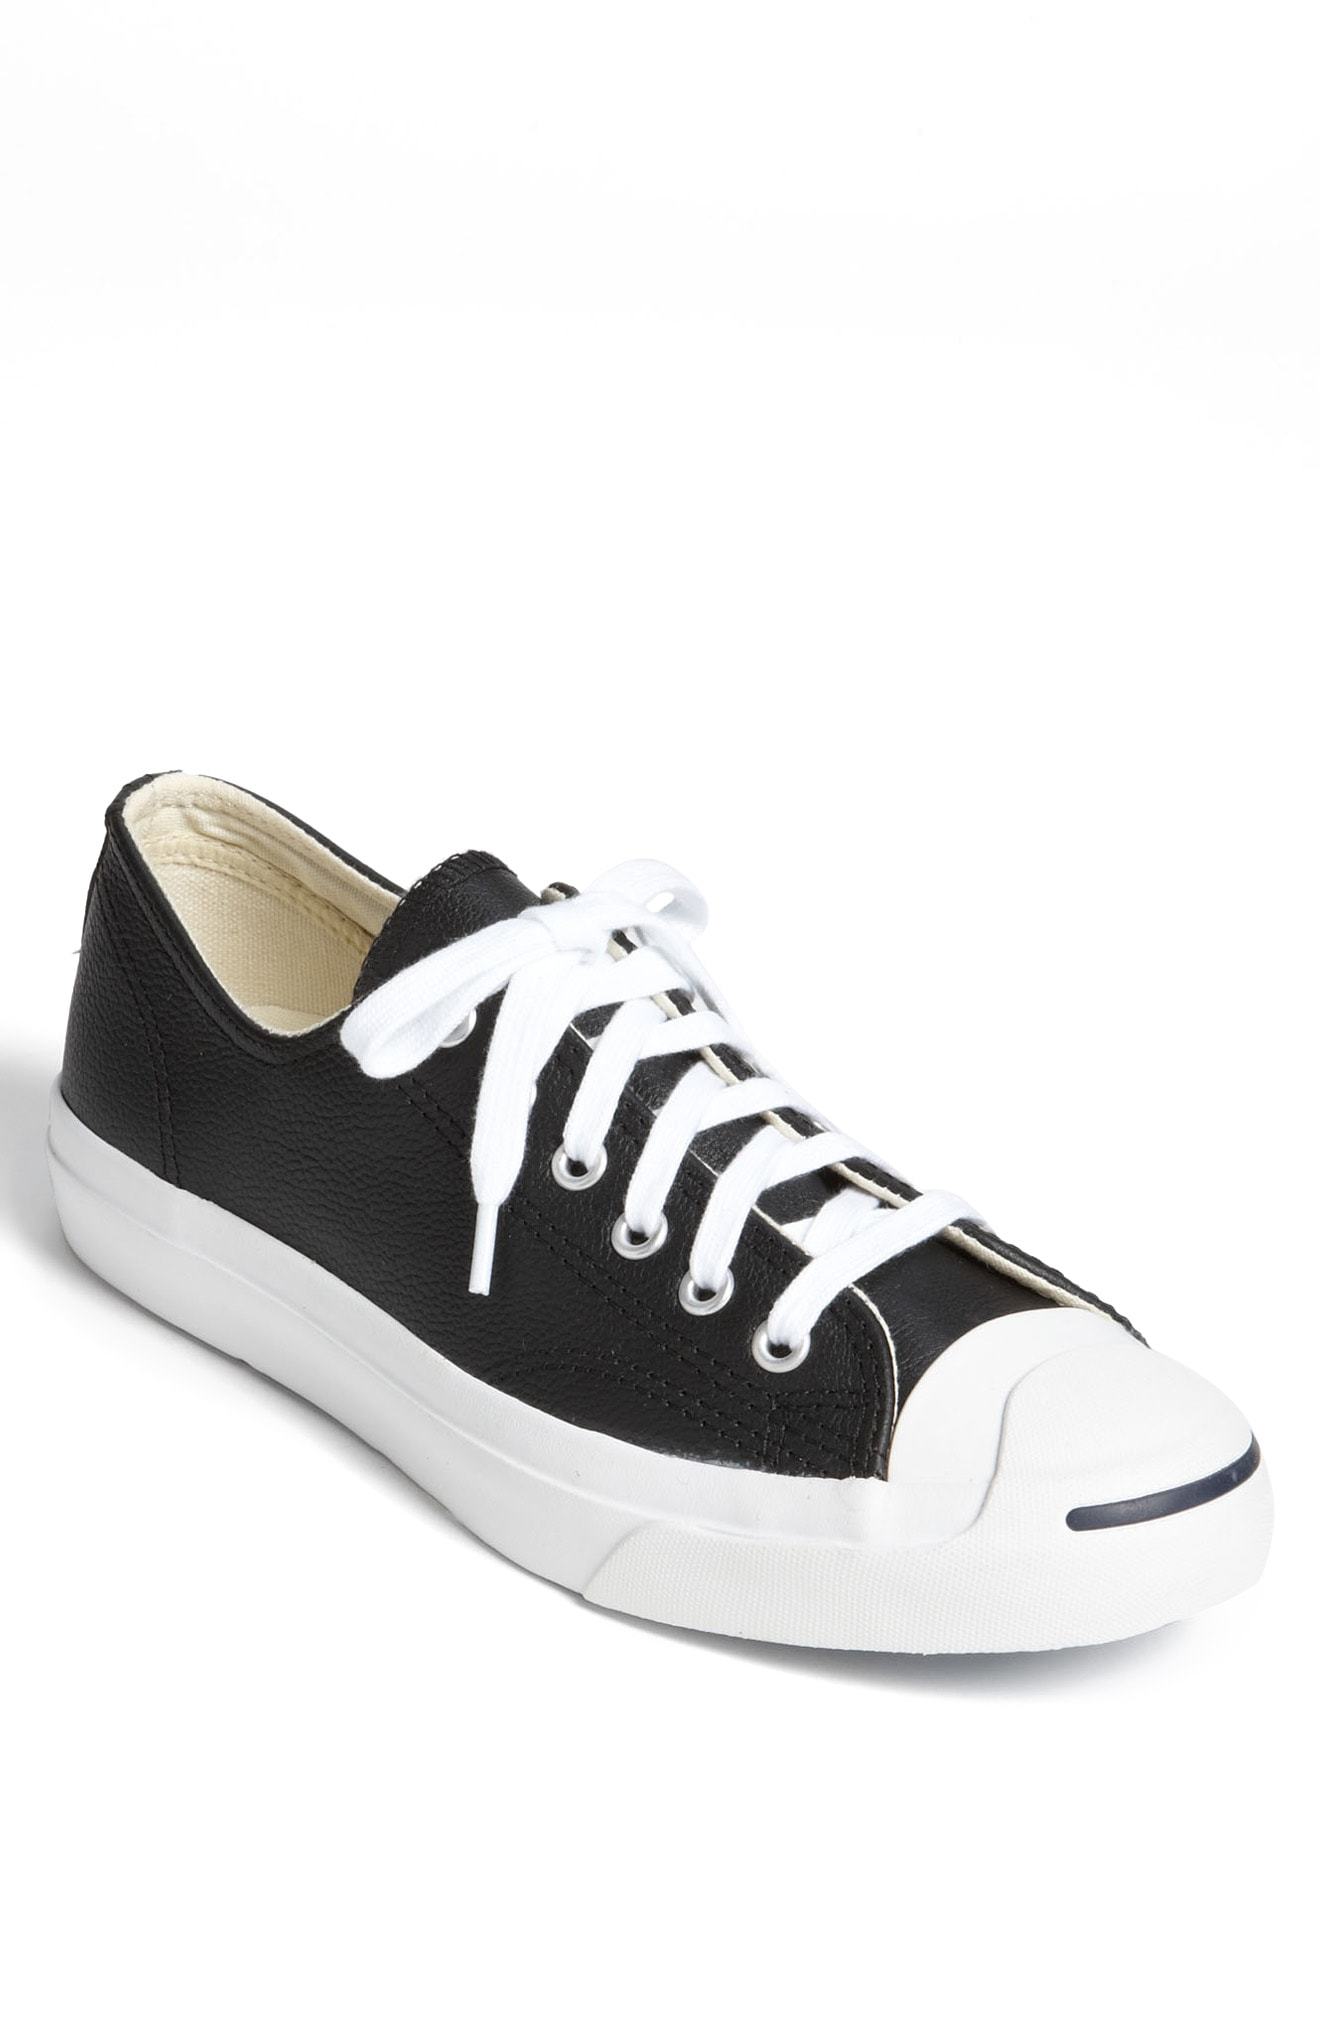 leather converse nordstrom